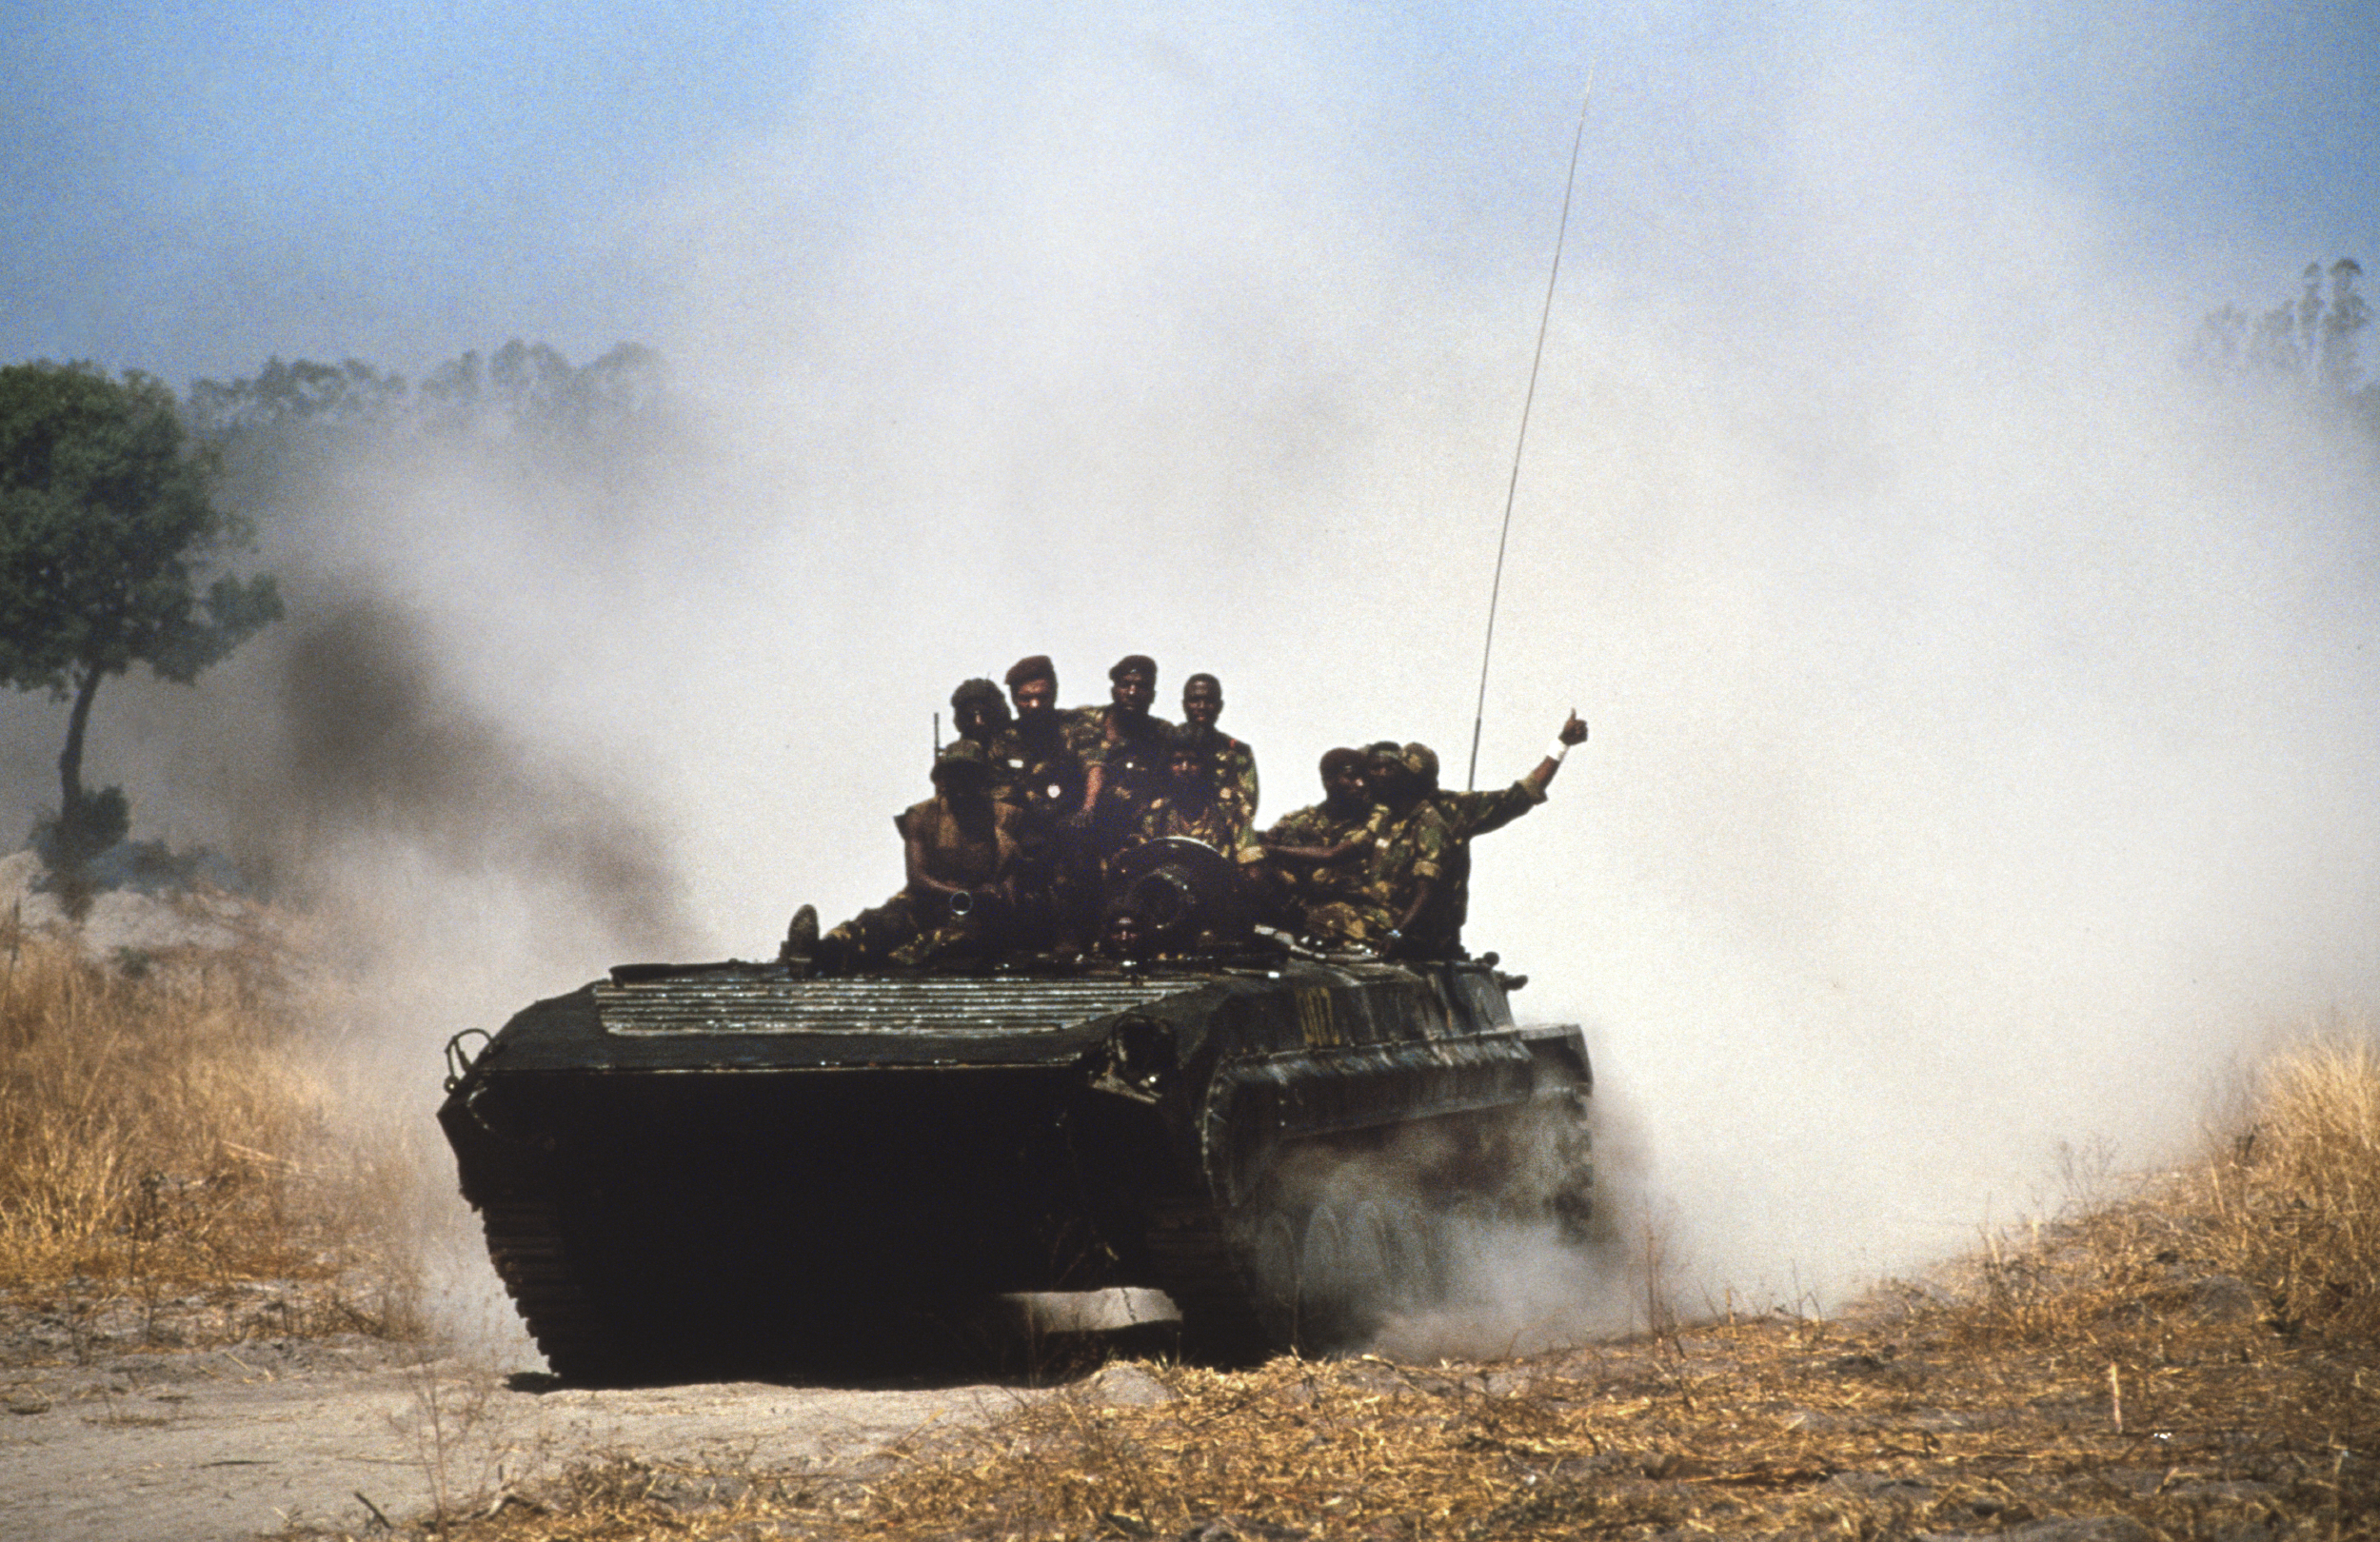  A tank and crew returning from the frontline during Angola's brutal civil war. Quito, Angola, 1993 